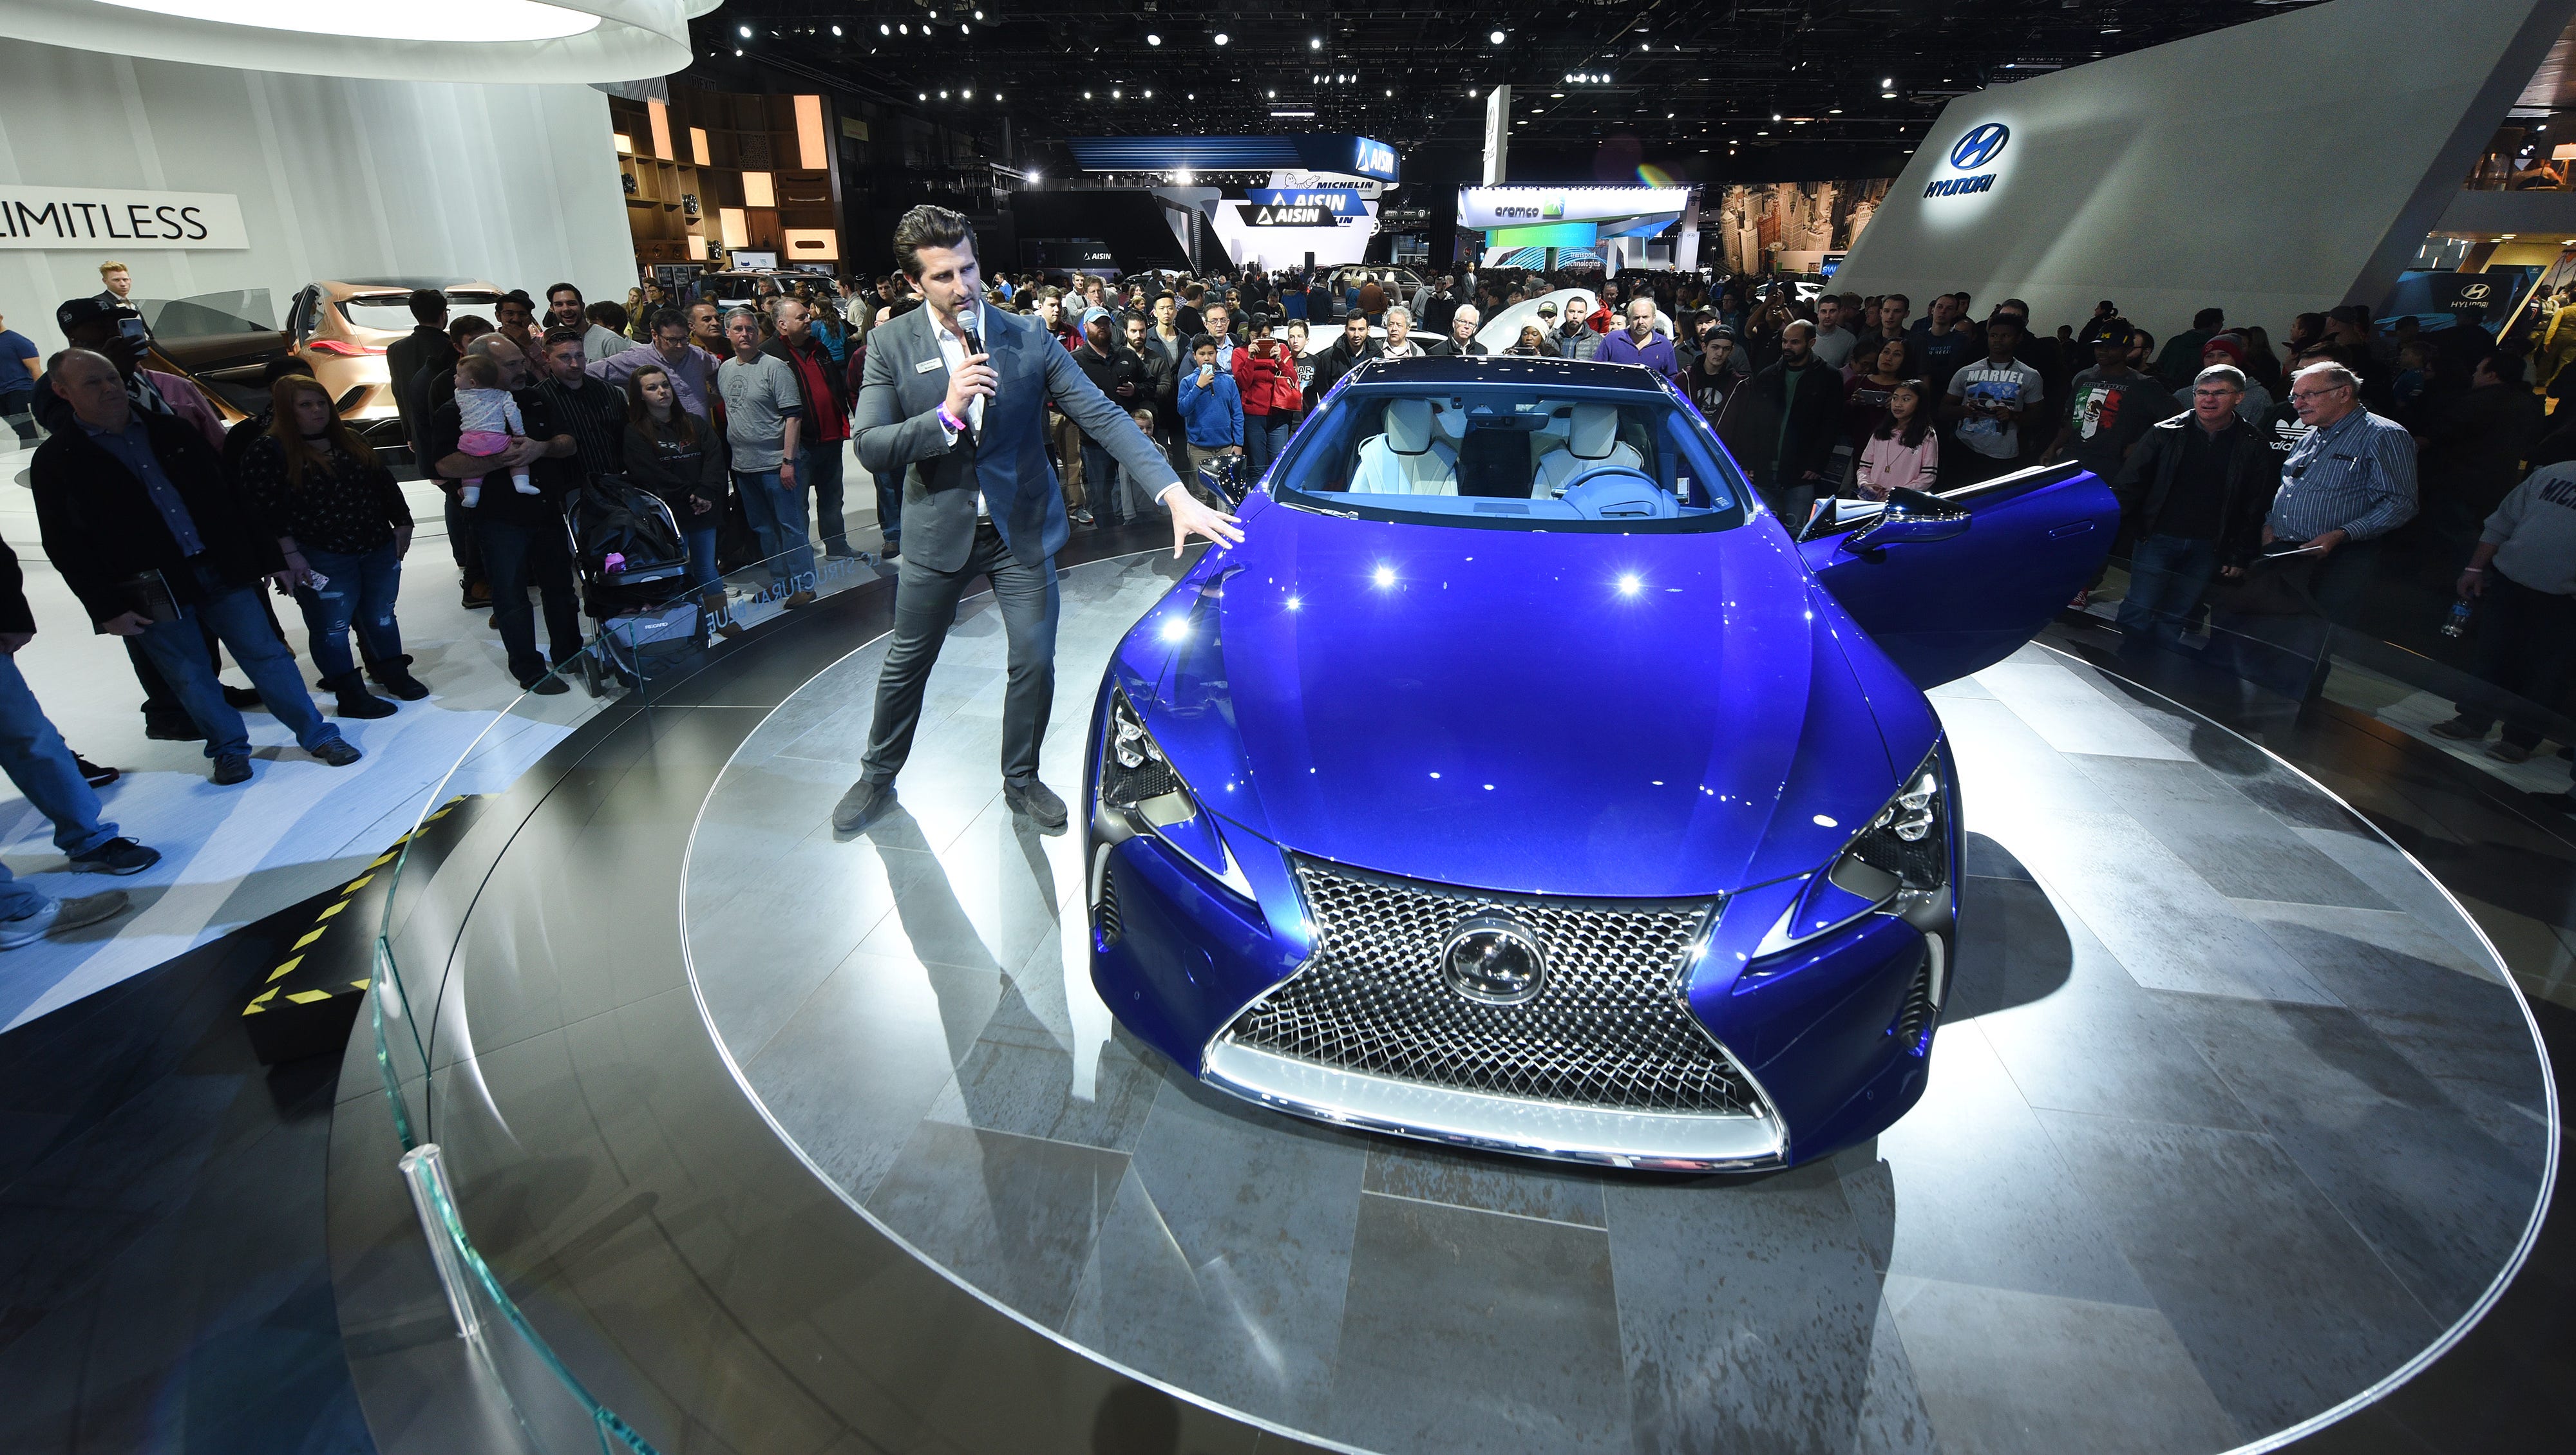 Brandon Layne, Lexus, speaks about the 2018 Lexus LC 500 V8 Coupe on Saturday January 20, 2018 for the first public day for the North American International Auto Show